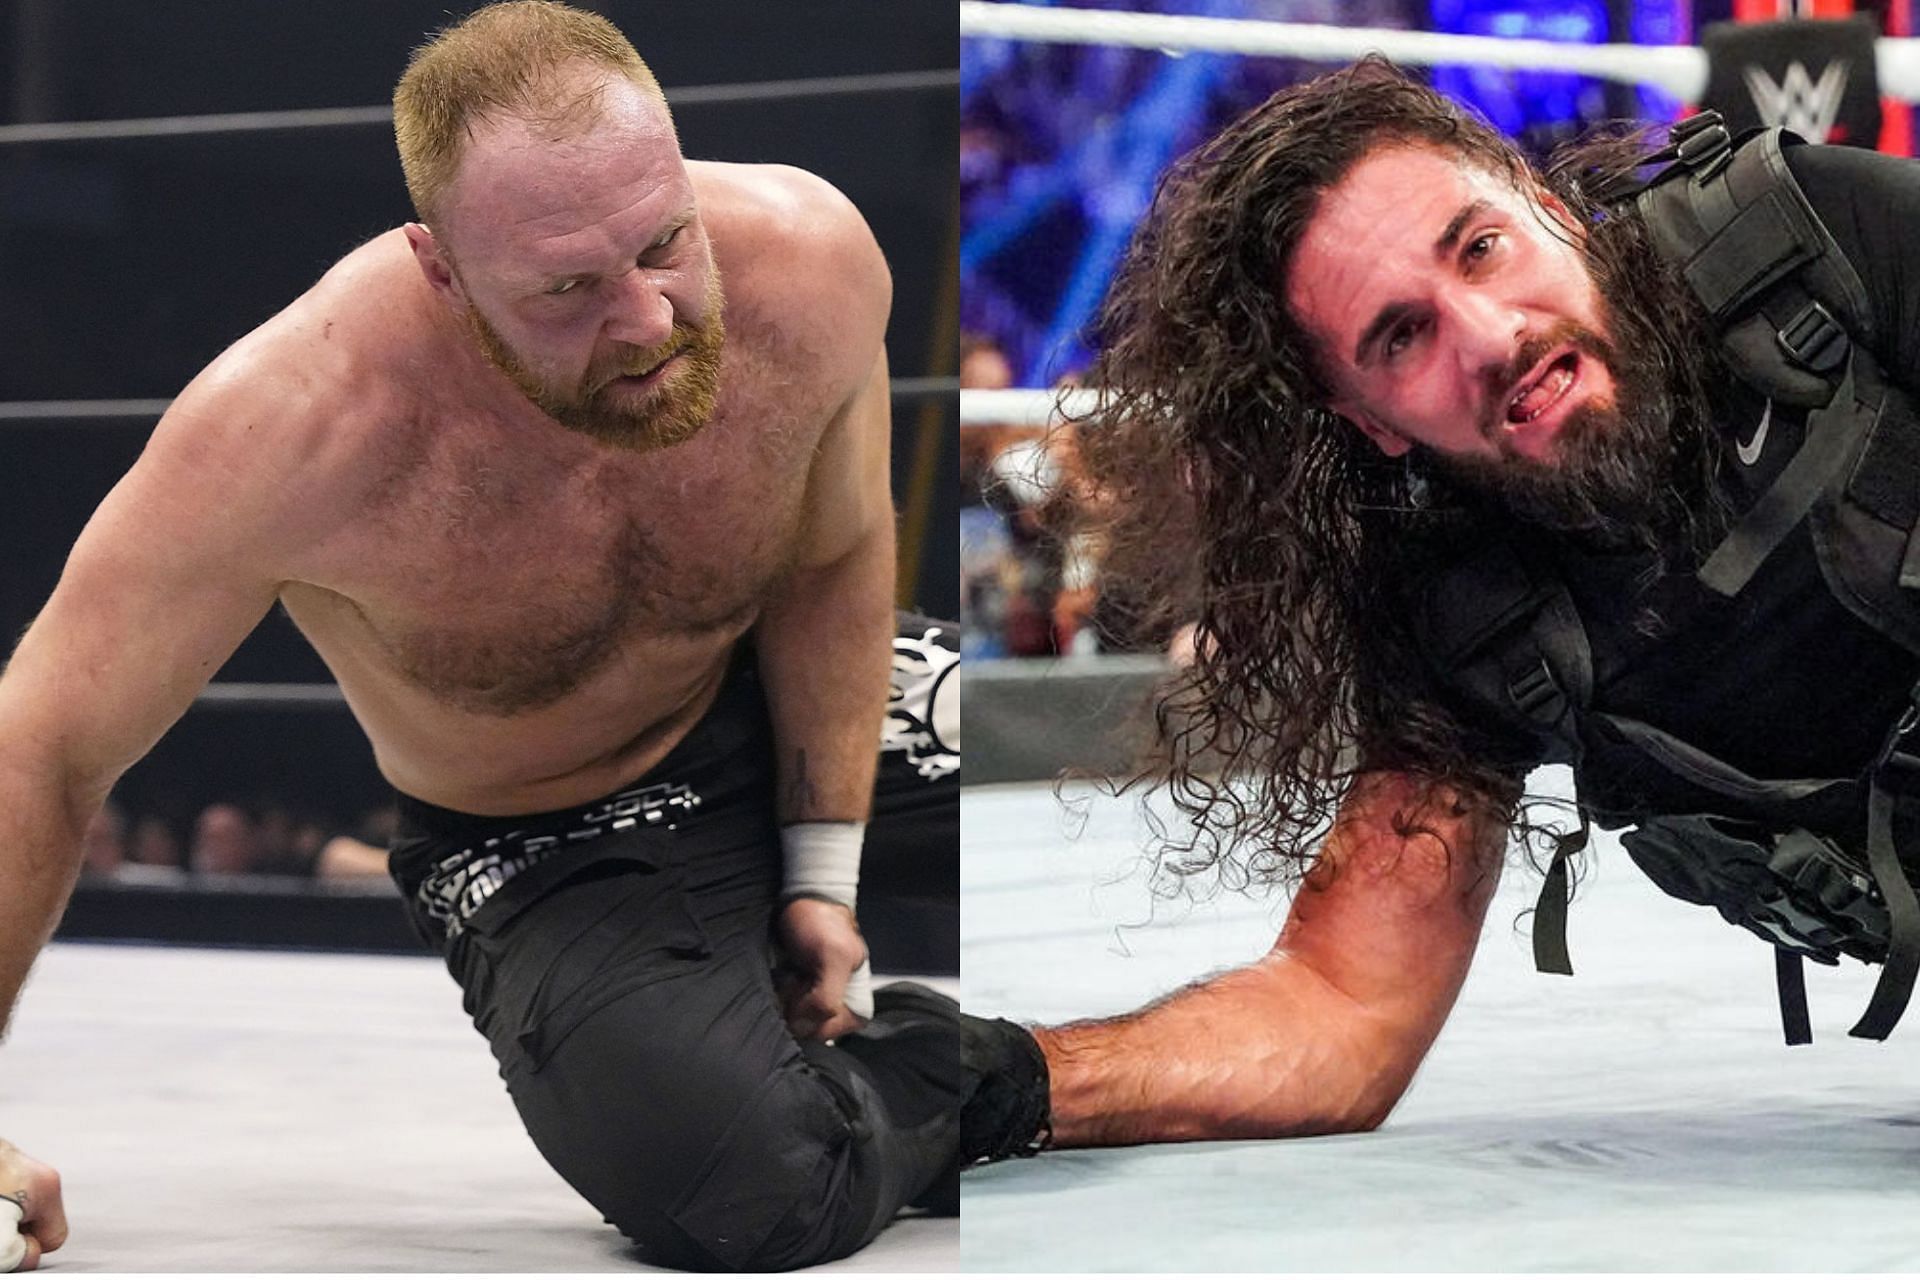 A list of AEW wrestlers better than Seth Rollins [Image Credits:AEW Facebook and WWE.com]